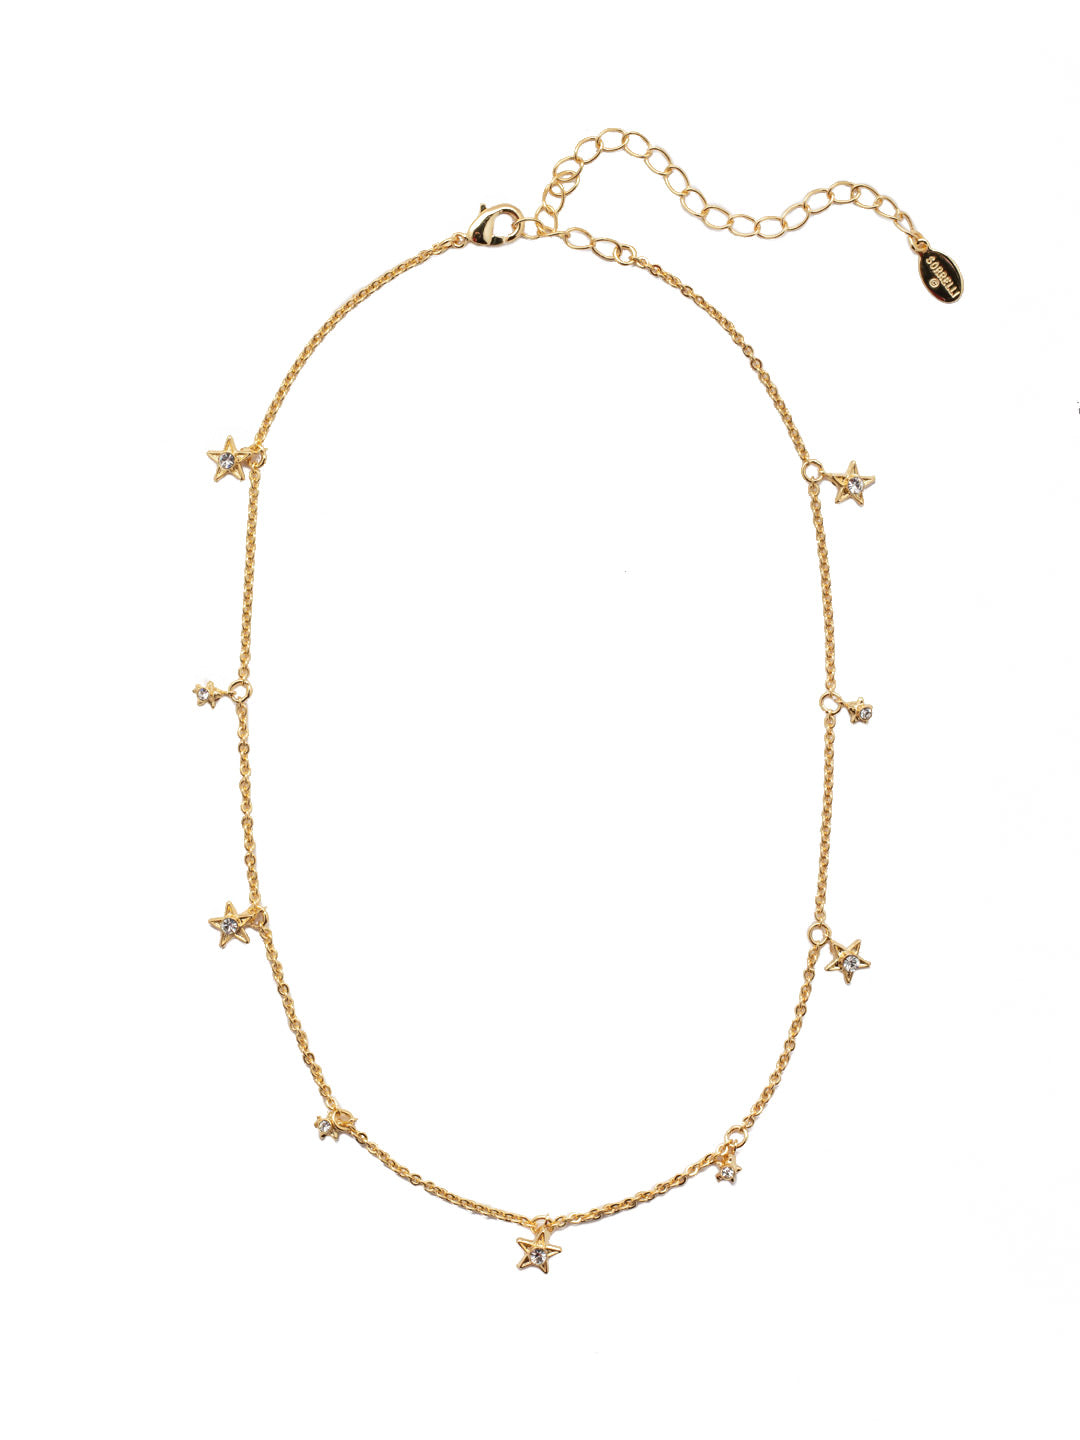 Asteria Tennis Necklace - 4NEZ23BGCRY - <p>The Asteria Tennis Necklace is a dainty dream; crystal studded stars wrap around the length of a delicate chain. A lobster claw clasp secures the adjustable chain into various lengths. From Sorrelli's Crystal collection in our Bright Gold-tone finish.</p>